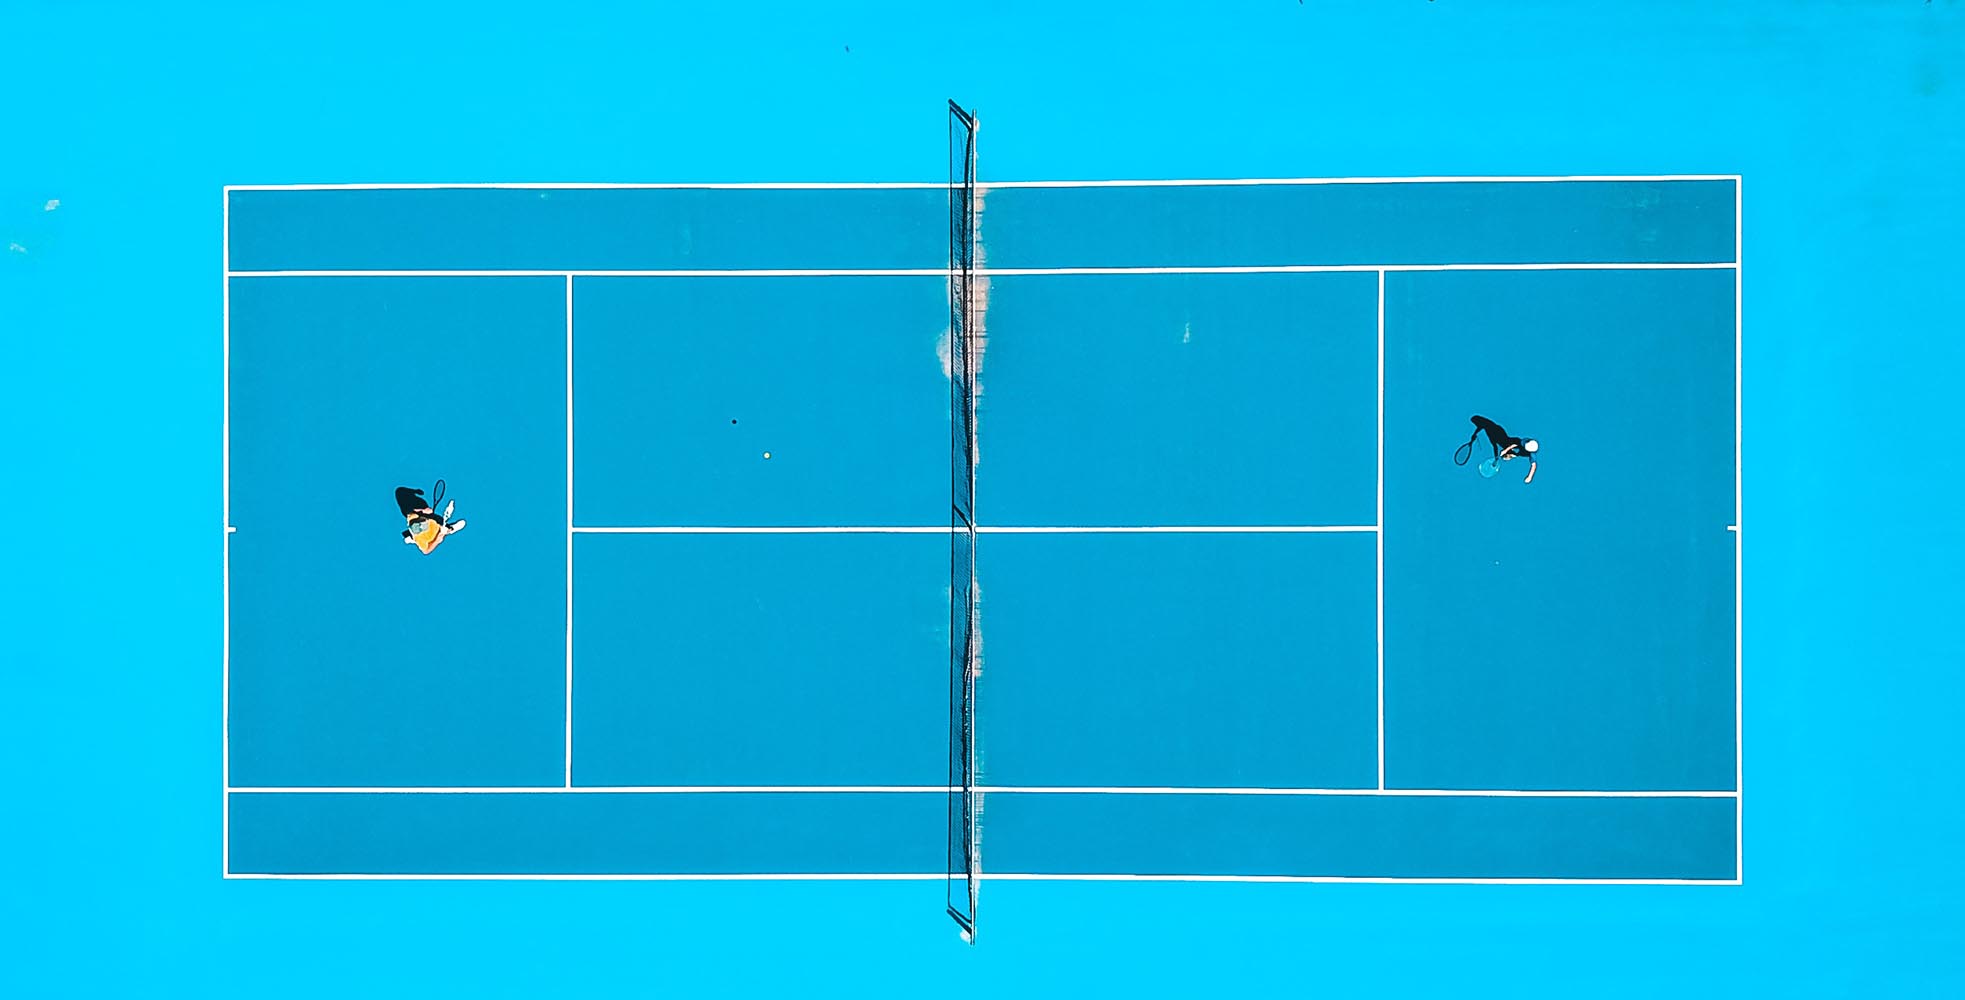 Overhead view of players on a tennis court